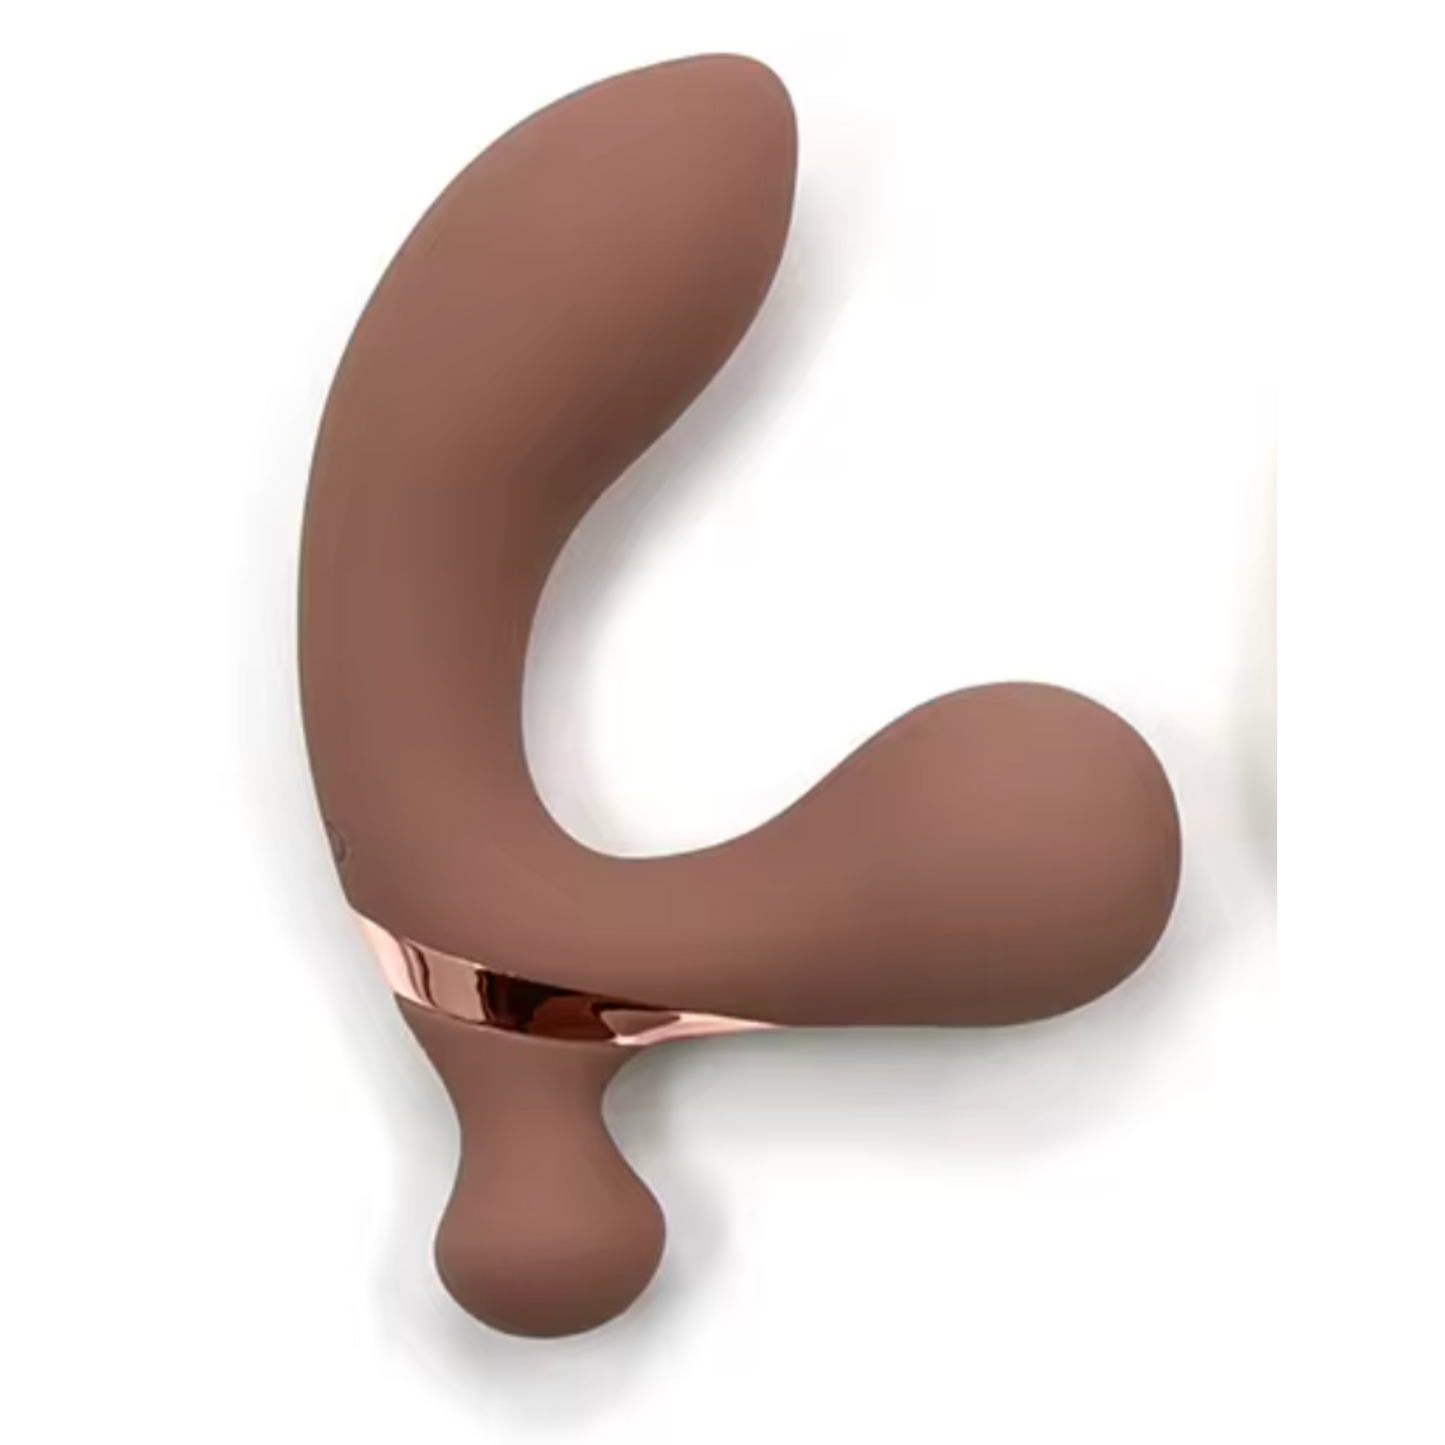 Blissed Out-In | 2 in 1 G spot Clitoral Stimulator Masturbator Vibrator Sex Toys For Women for $49 – Most Premium Toys from Ecsta Care